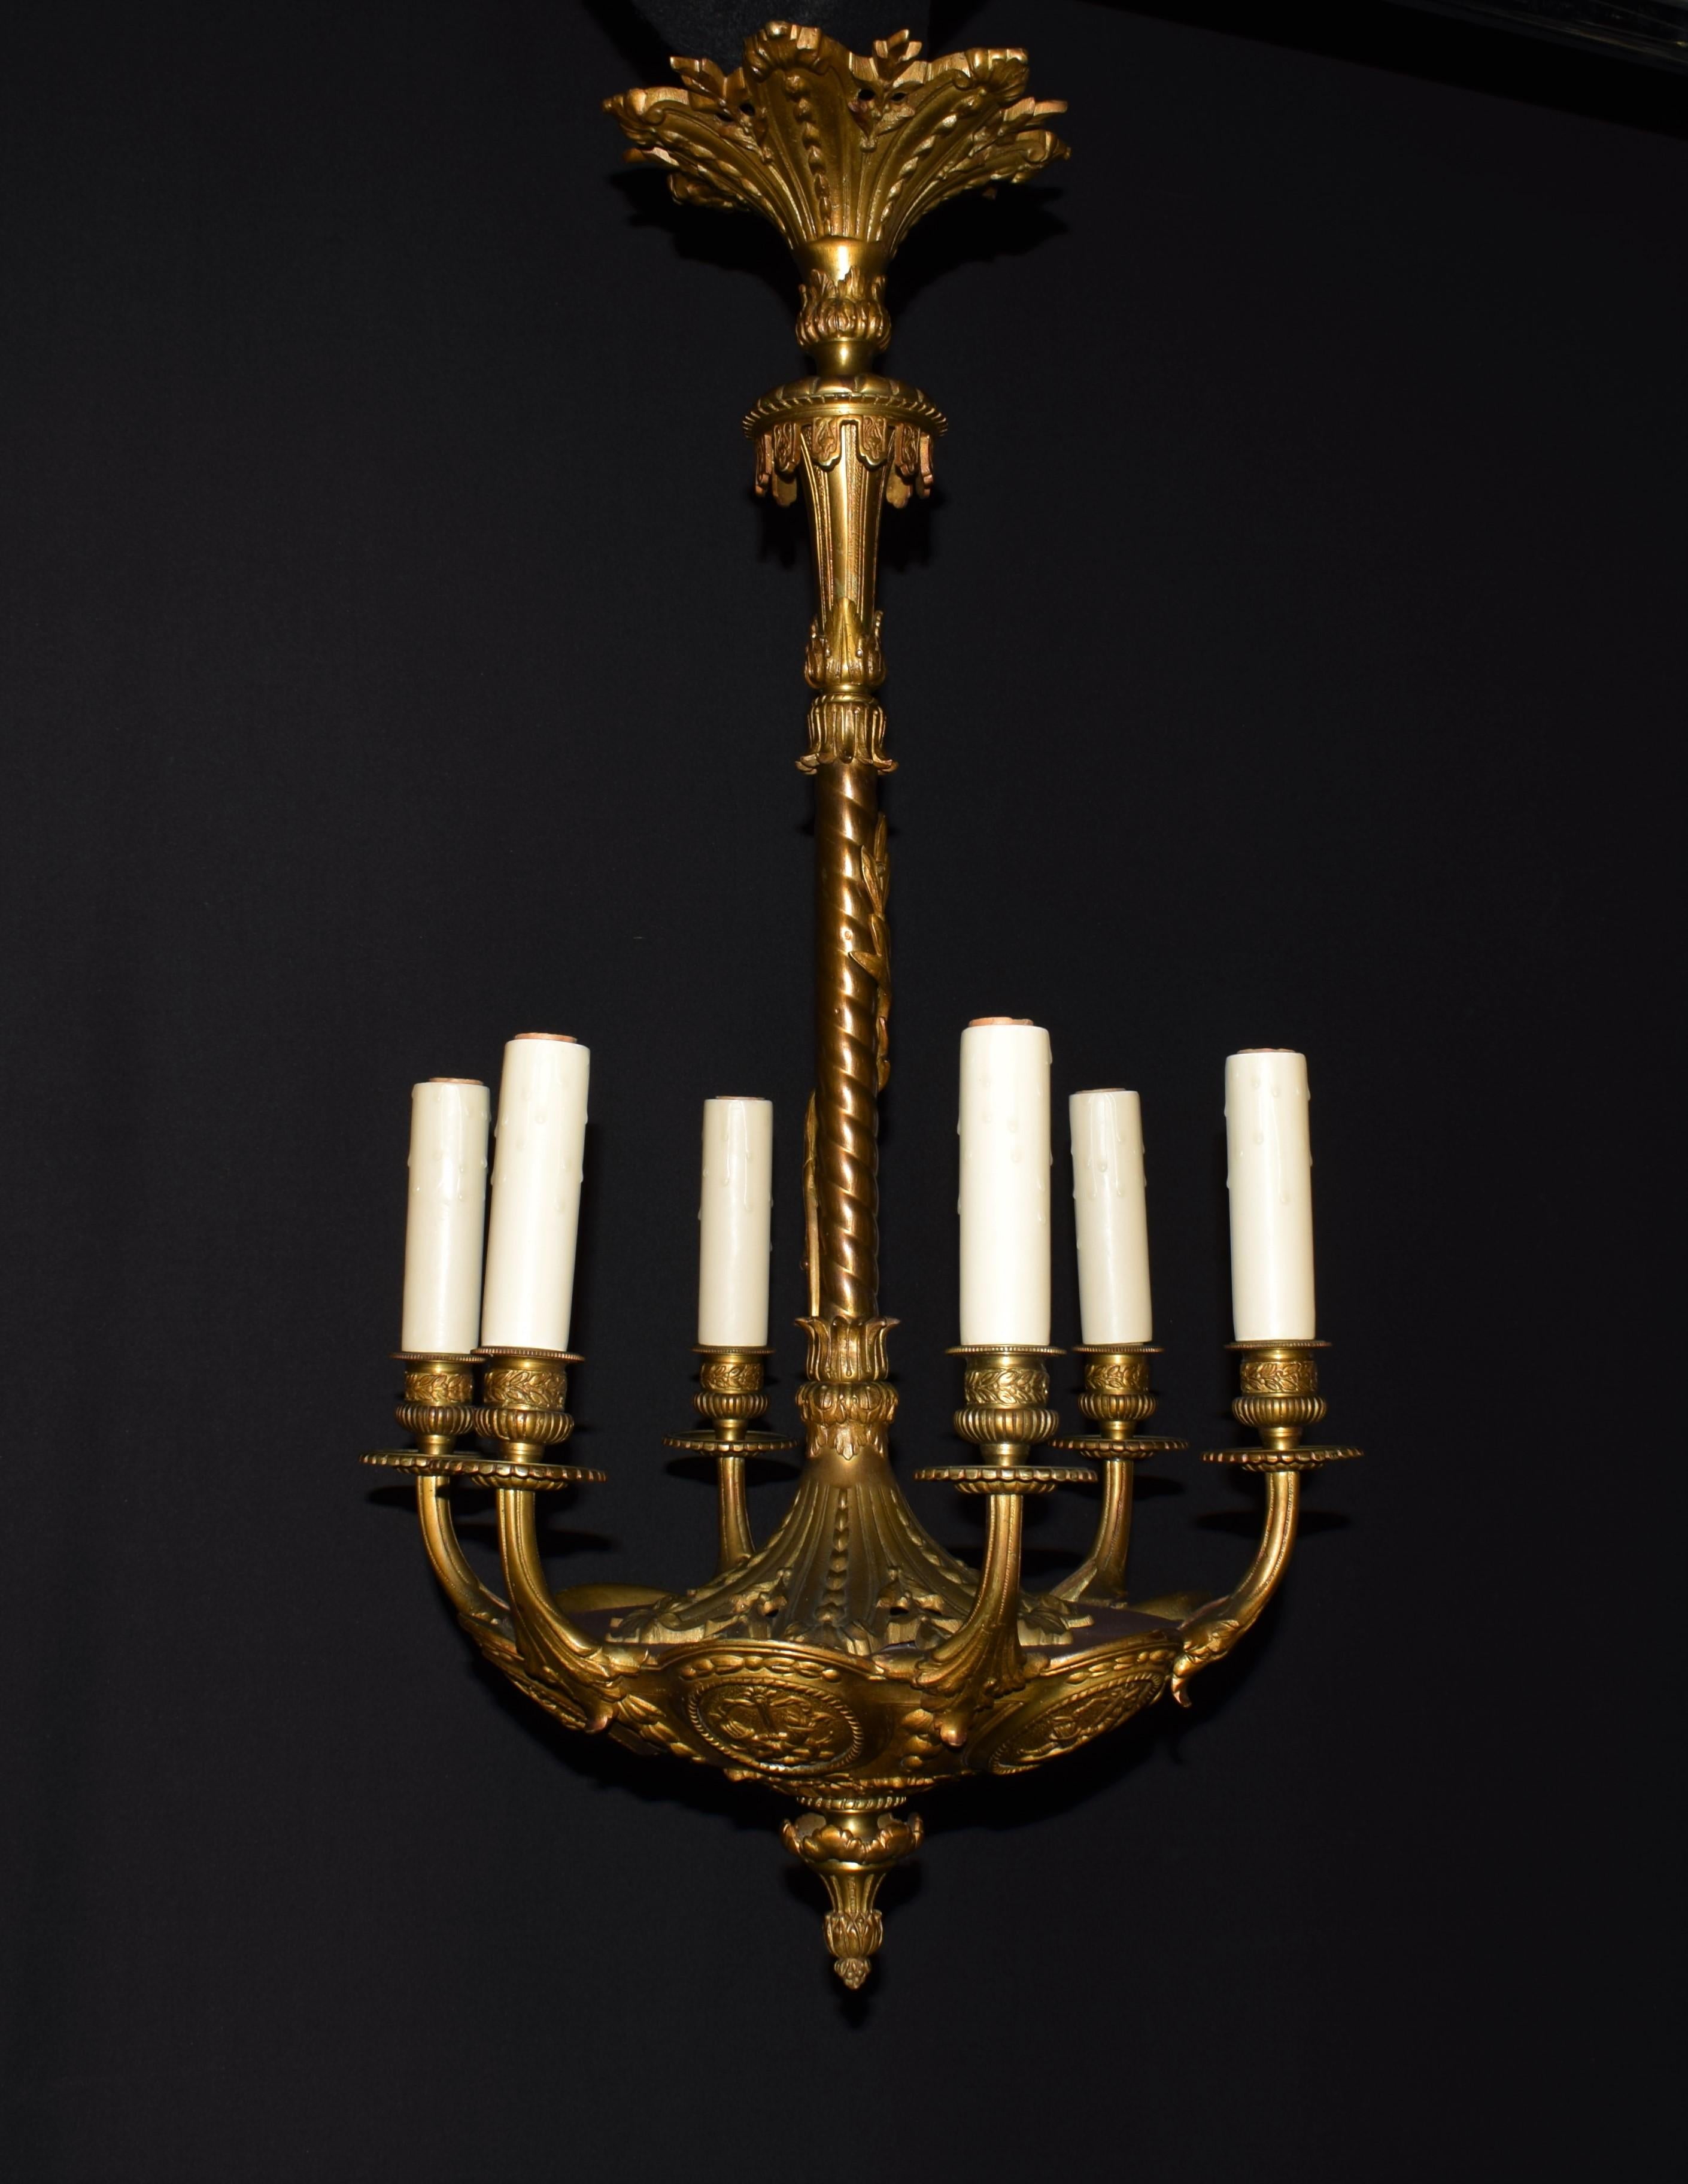 A fine gilt and patinated bronze chandelier. Great quality. Featuring oval reserves depicting crossed quivers and horns of plenty. France, circa 1910.

Dimensions:
H 28